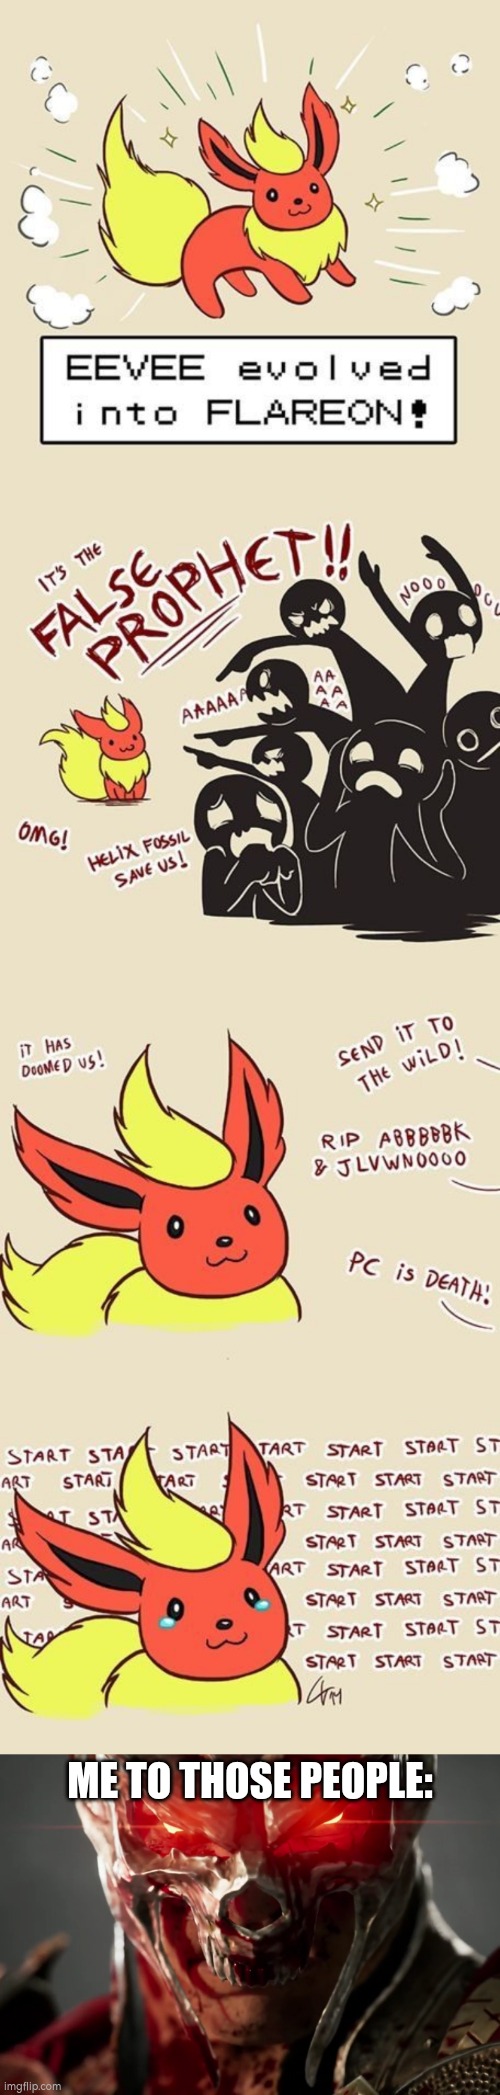 KILL THOSE PEOPLE!!! | ME TO THOSE PEOPLE: | image tagged in flareon,haters | made w/ Imgflip meme maker